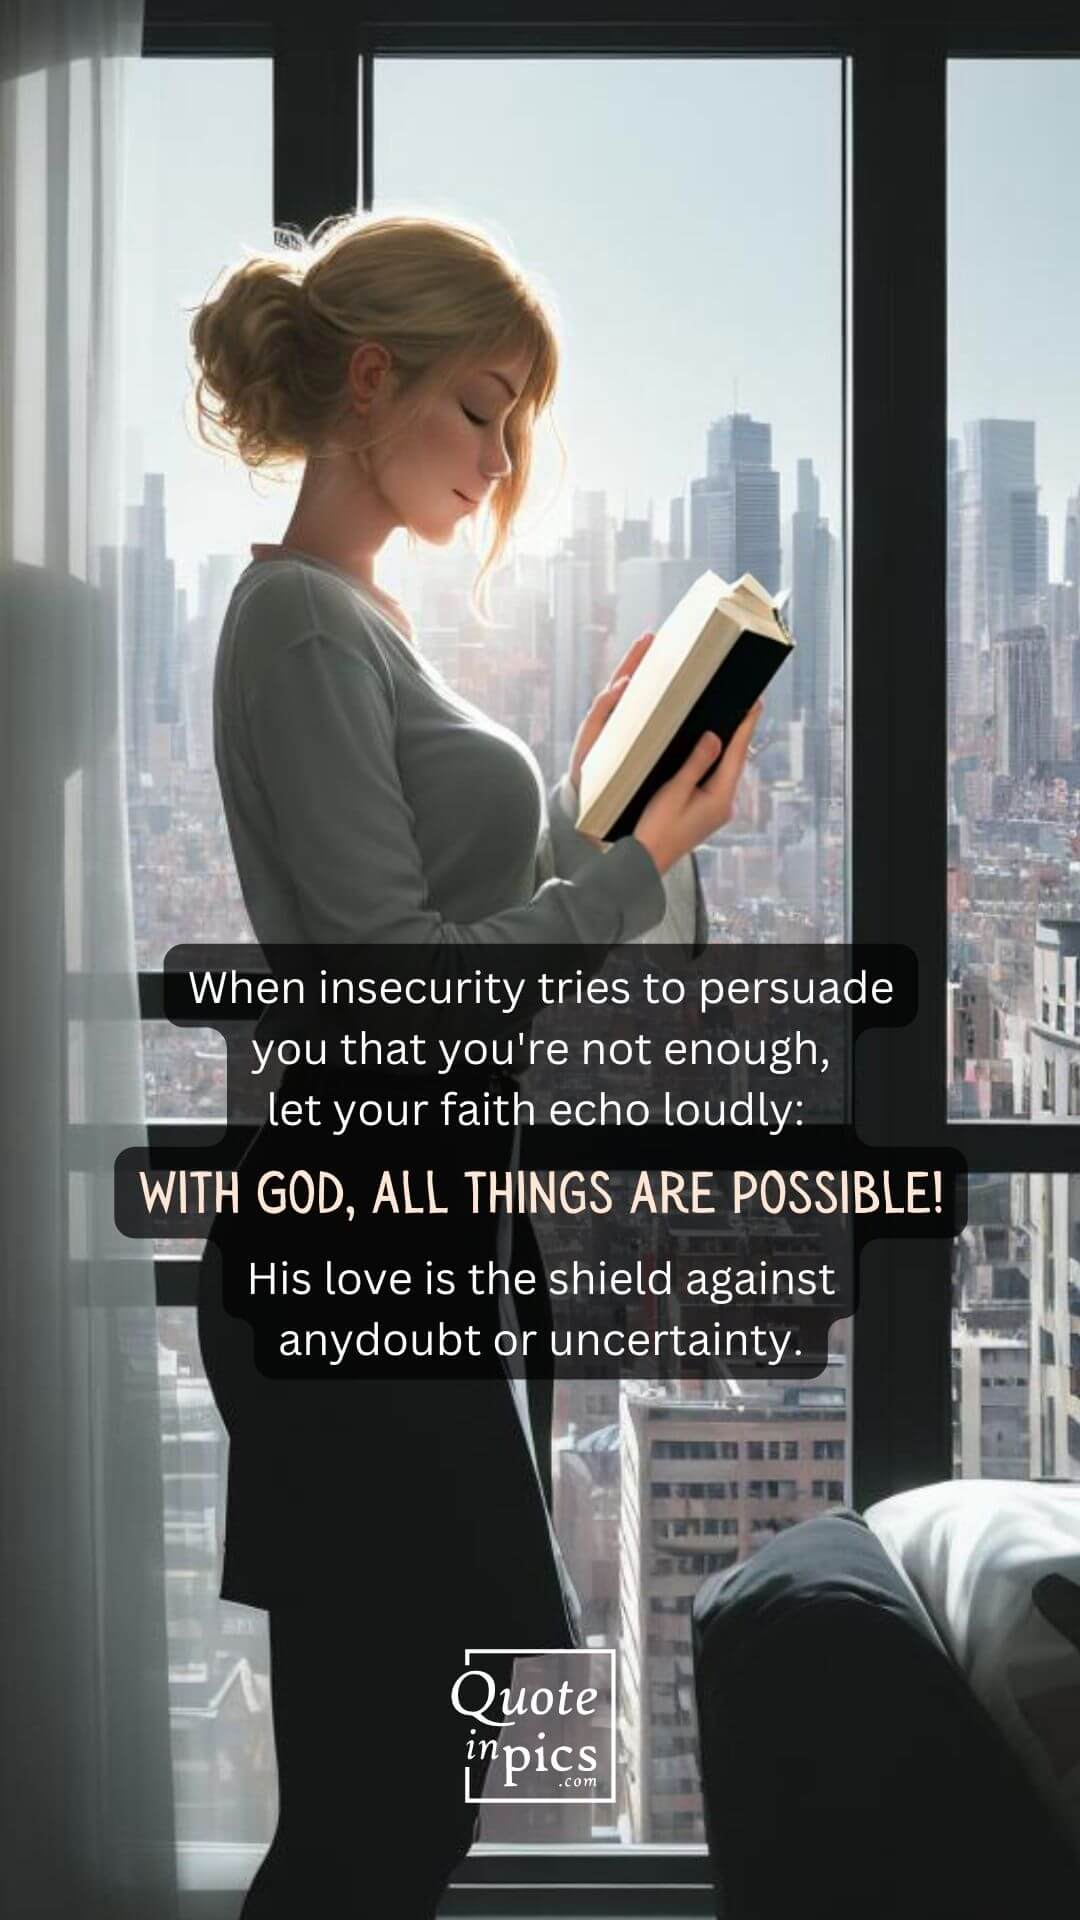 Insecurity whispering to you that you are not enough? Say with faith: With God, everything is possible!